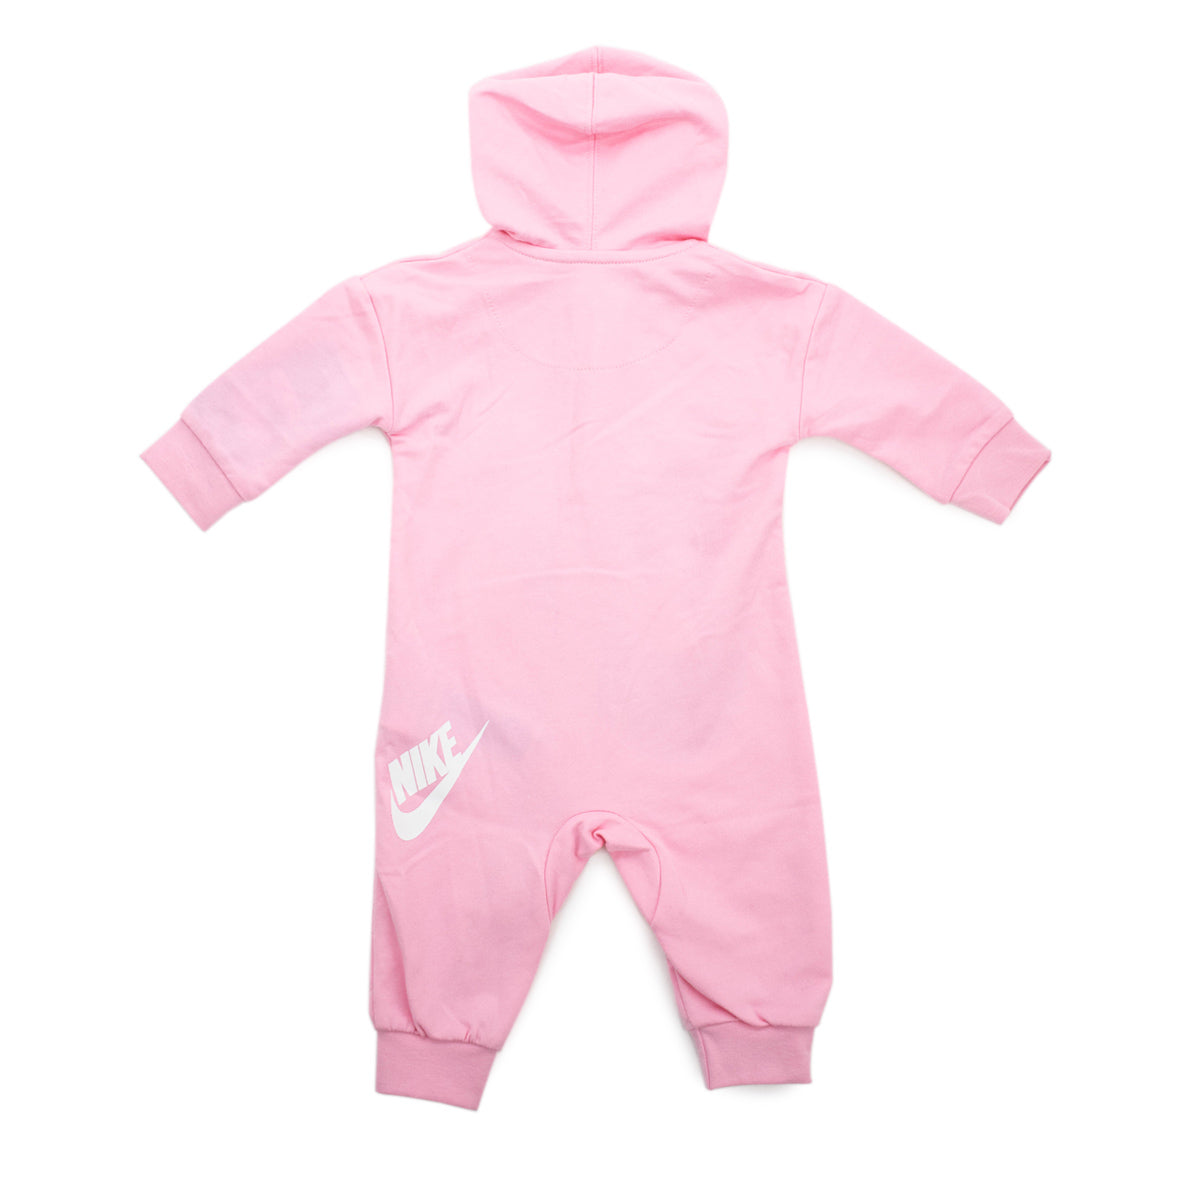 Nike Baby French All – Brooklyn 5NB954-A8F Terry x Fashion Strampler pi - Day Play Footwear Coverall